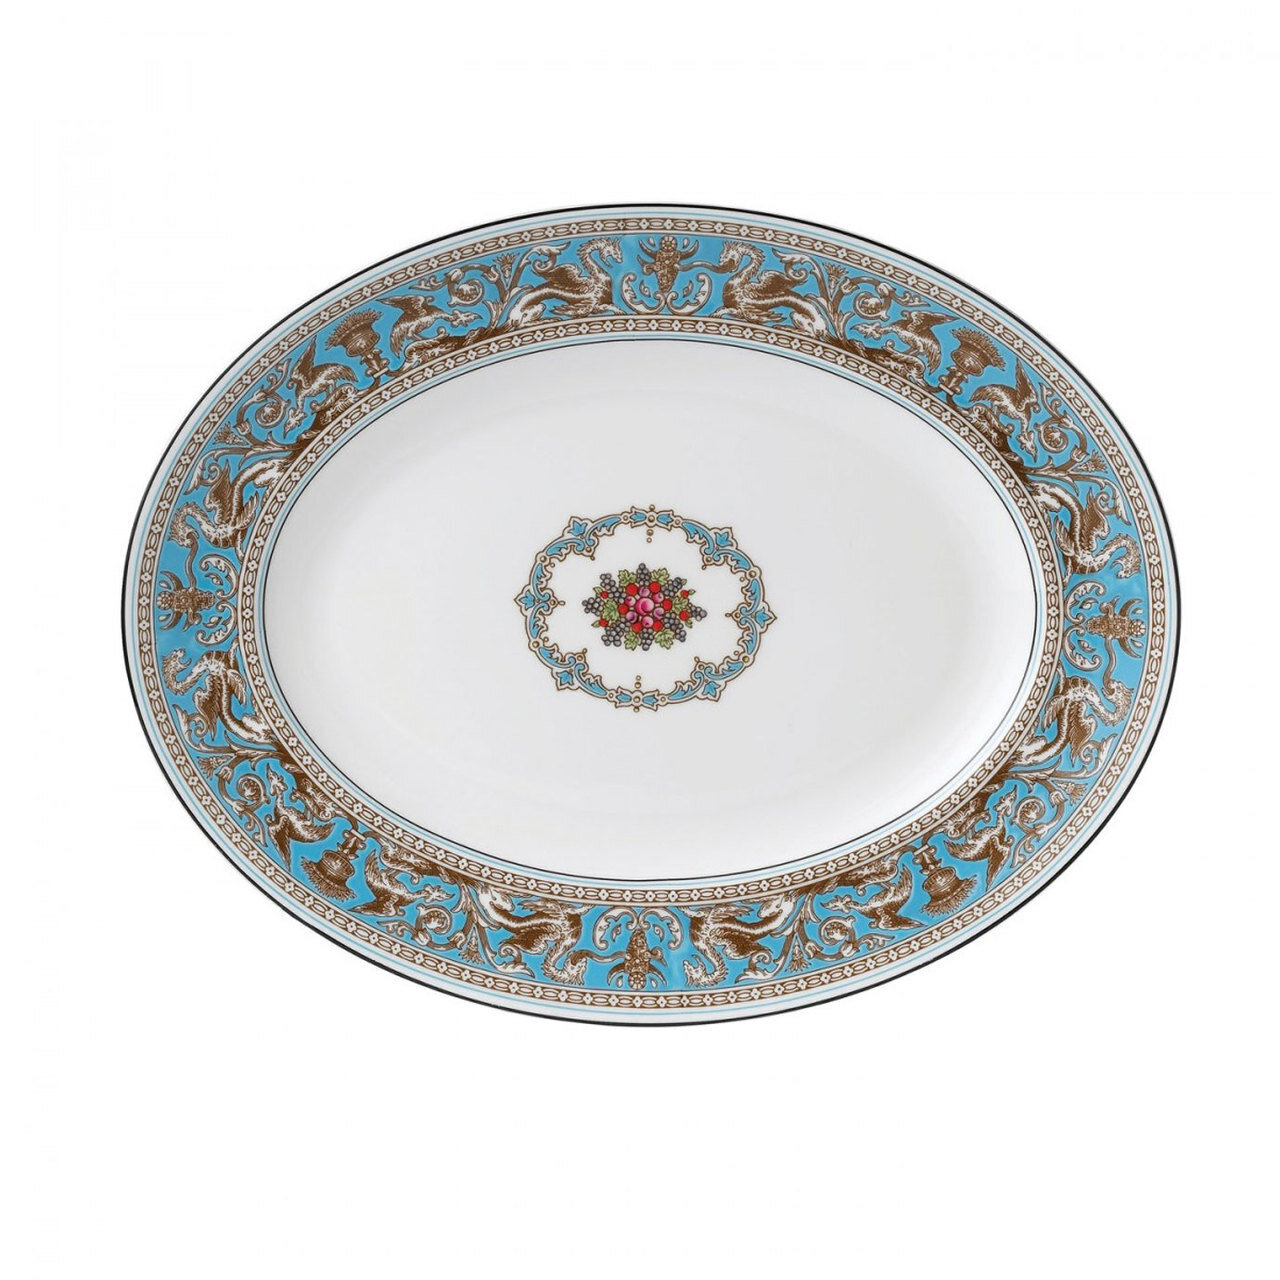 Wedgwood Florentine Turquoise Oval Platter 13.75 Inch